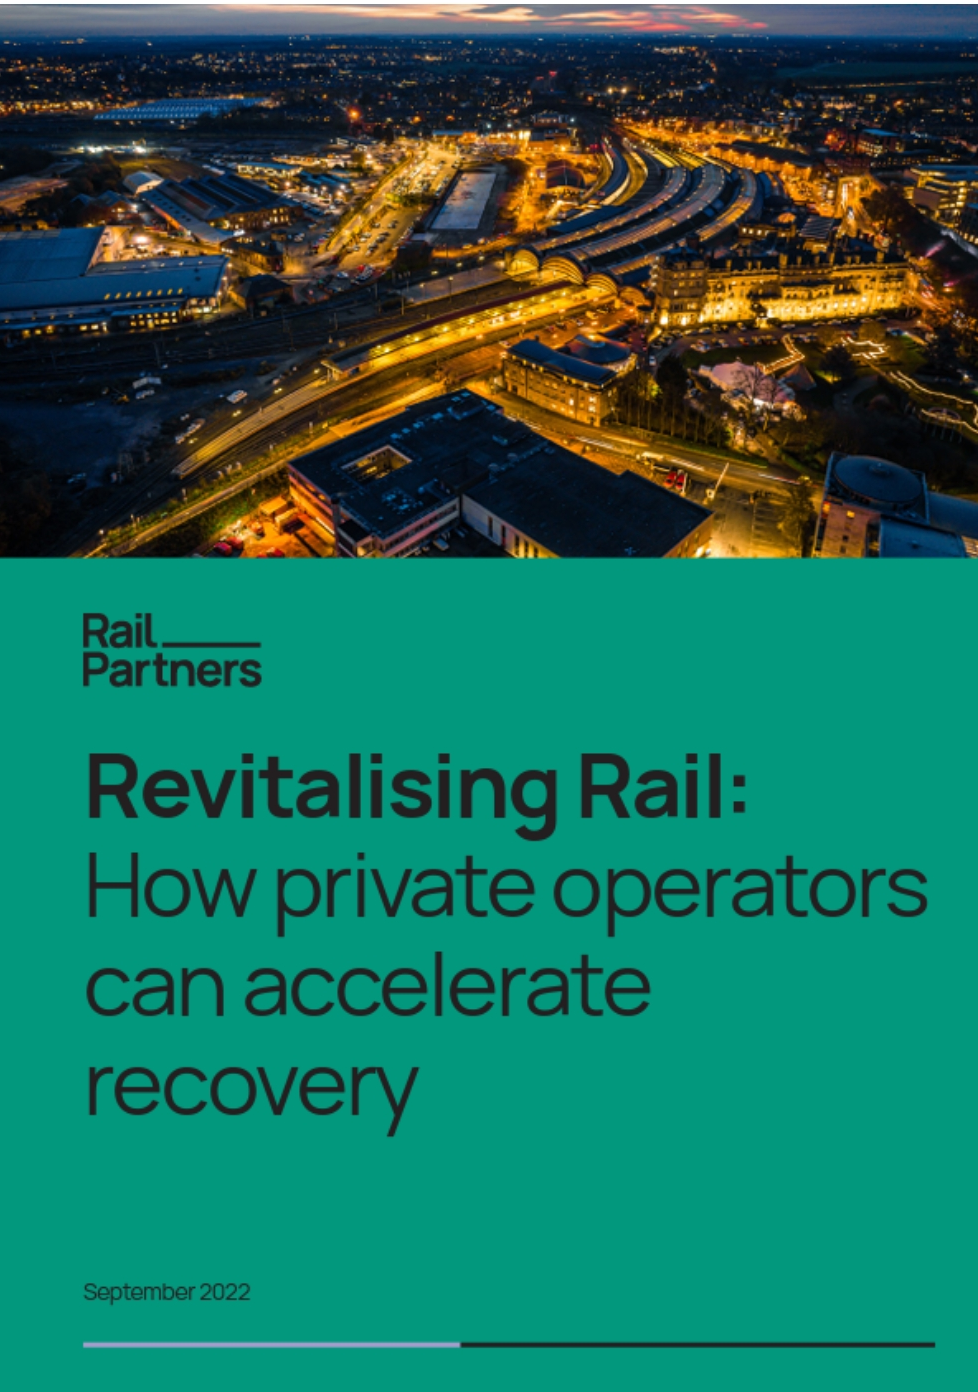 Revitalising Rail: How private operators can accelerate recovery